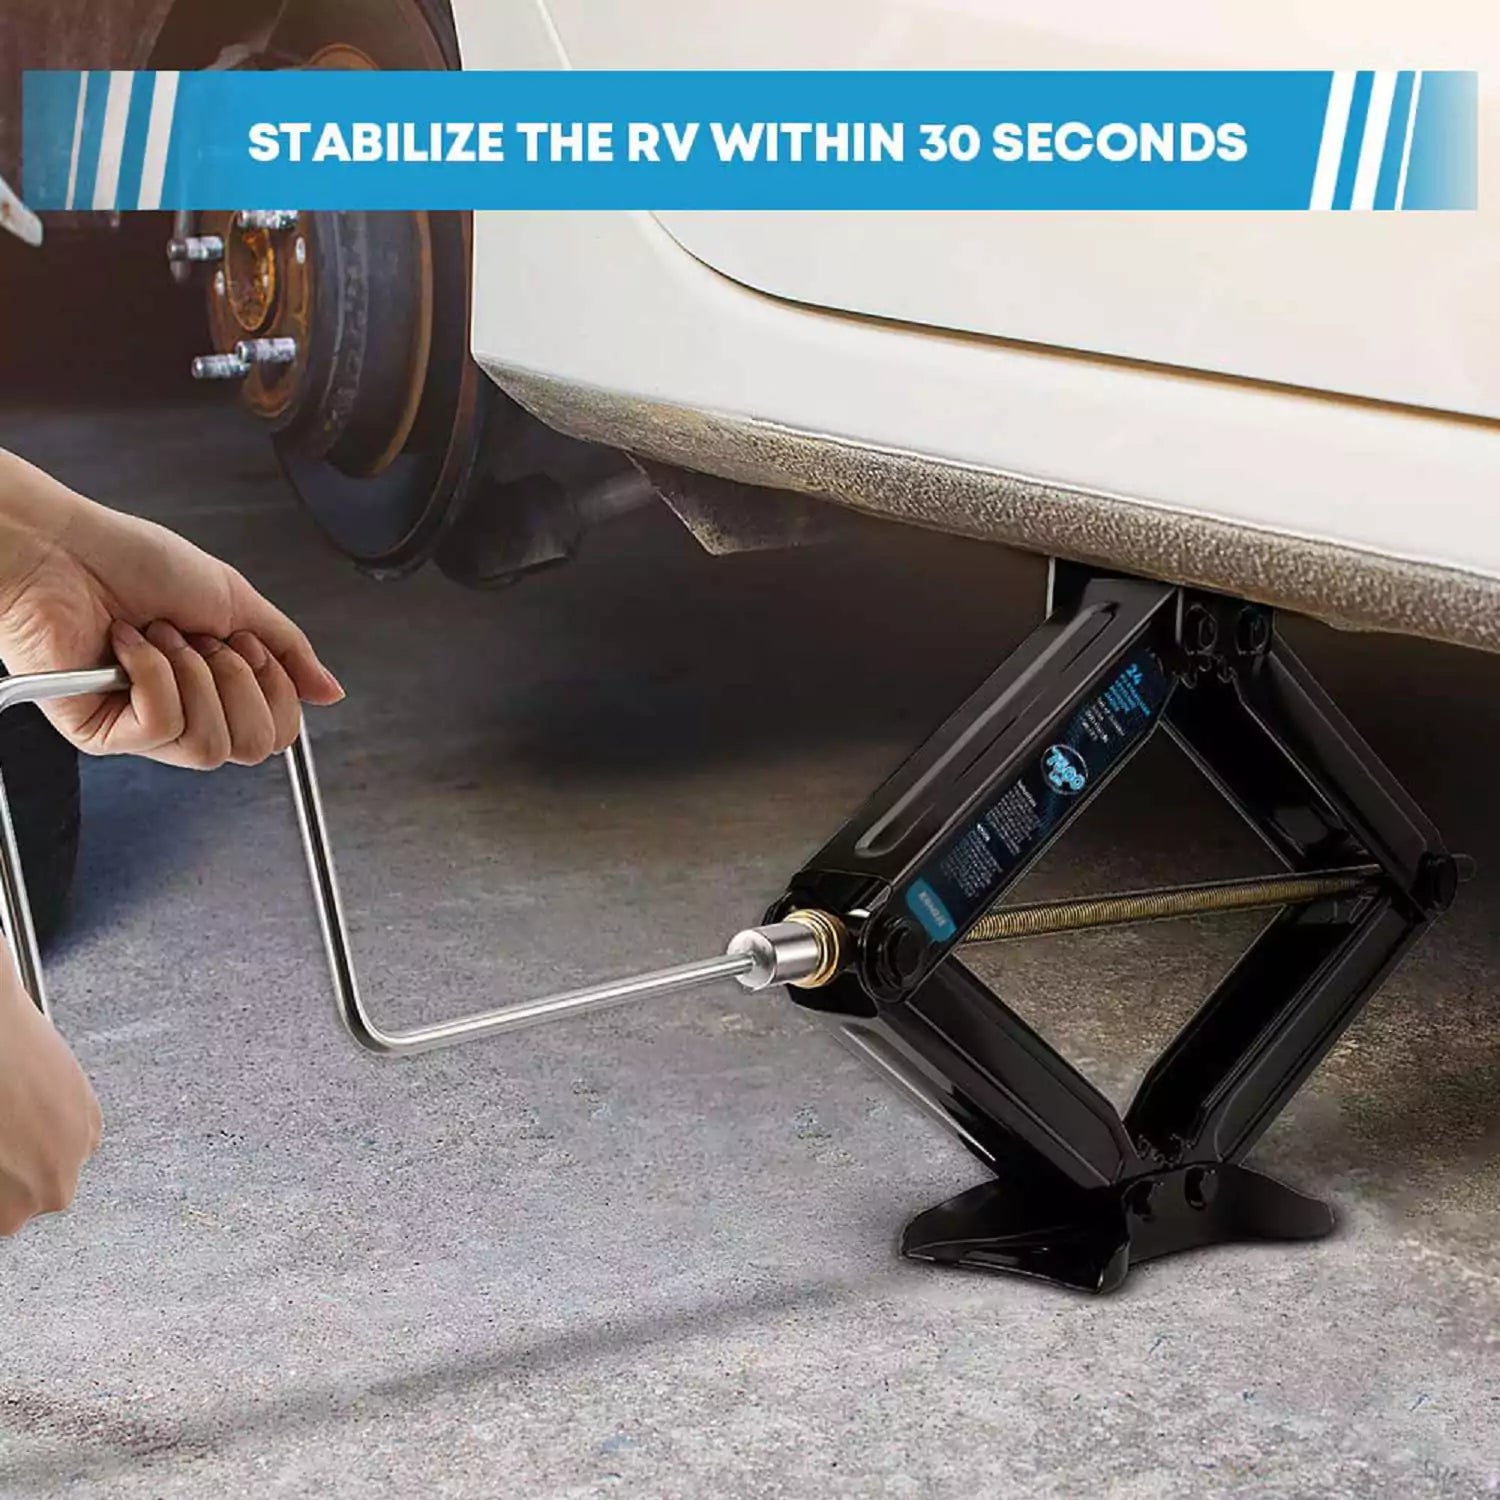 Stabilize the RV within 30 seconds with RV trailer stabilizer jacks